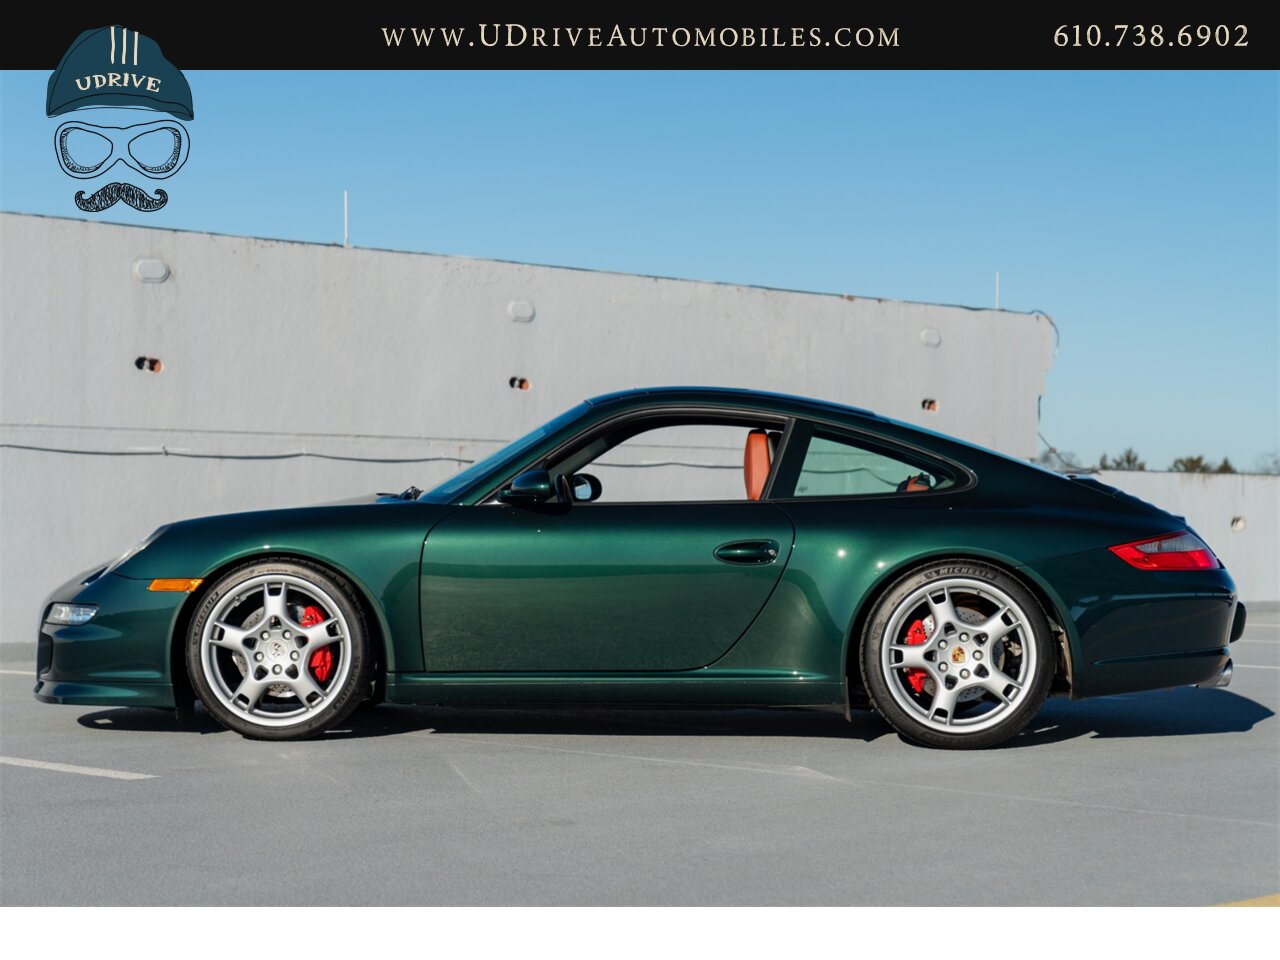 2007 Porsche 911 Carrera S 6Spd 997S RARE X51 Power Kit 381hp  1 of a Kind Forest Green over Blk/Terracotta Chrono Adap Sport Sts $113k MSRP - Photo 9 - West Chester, PA 19382